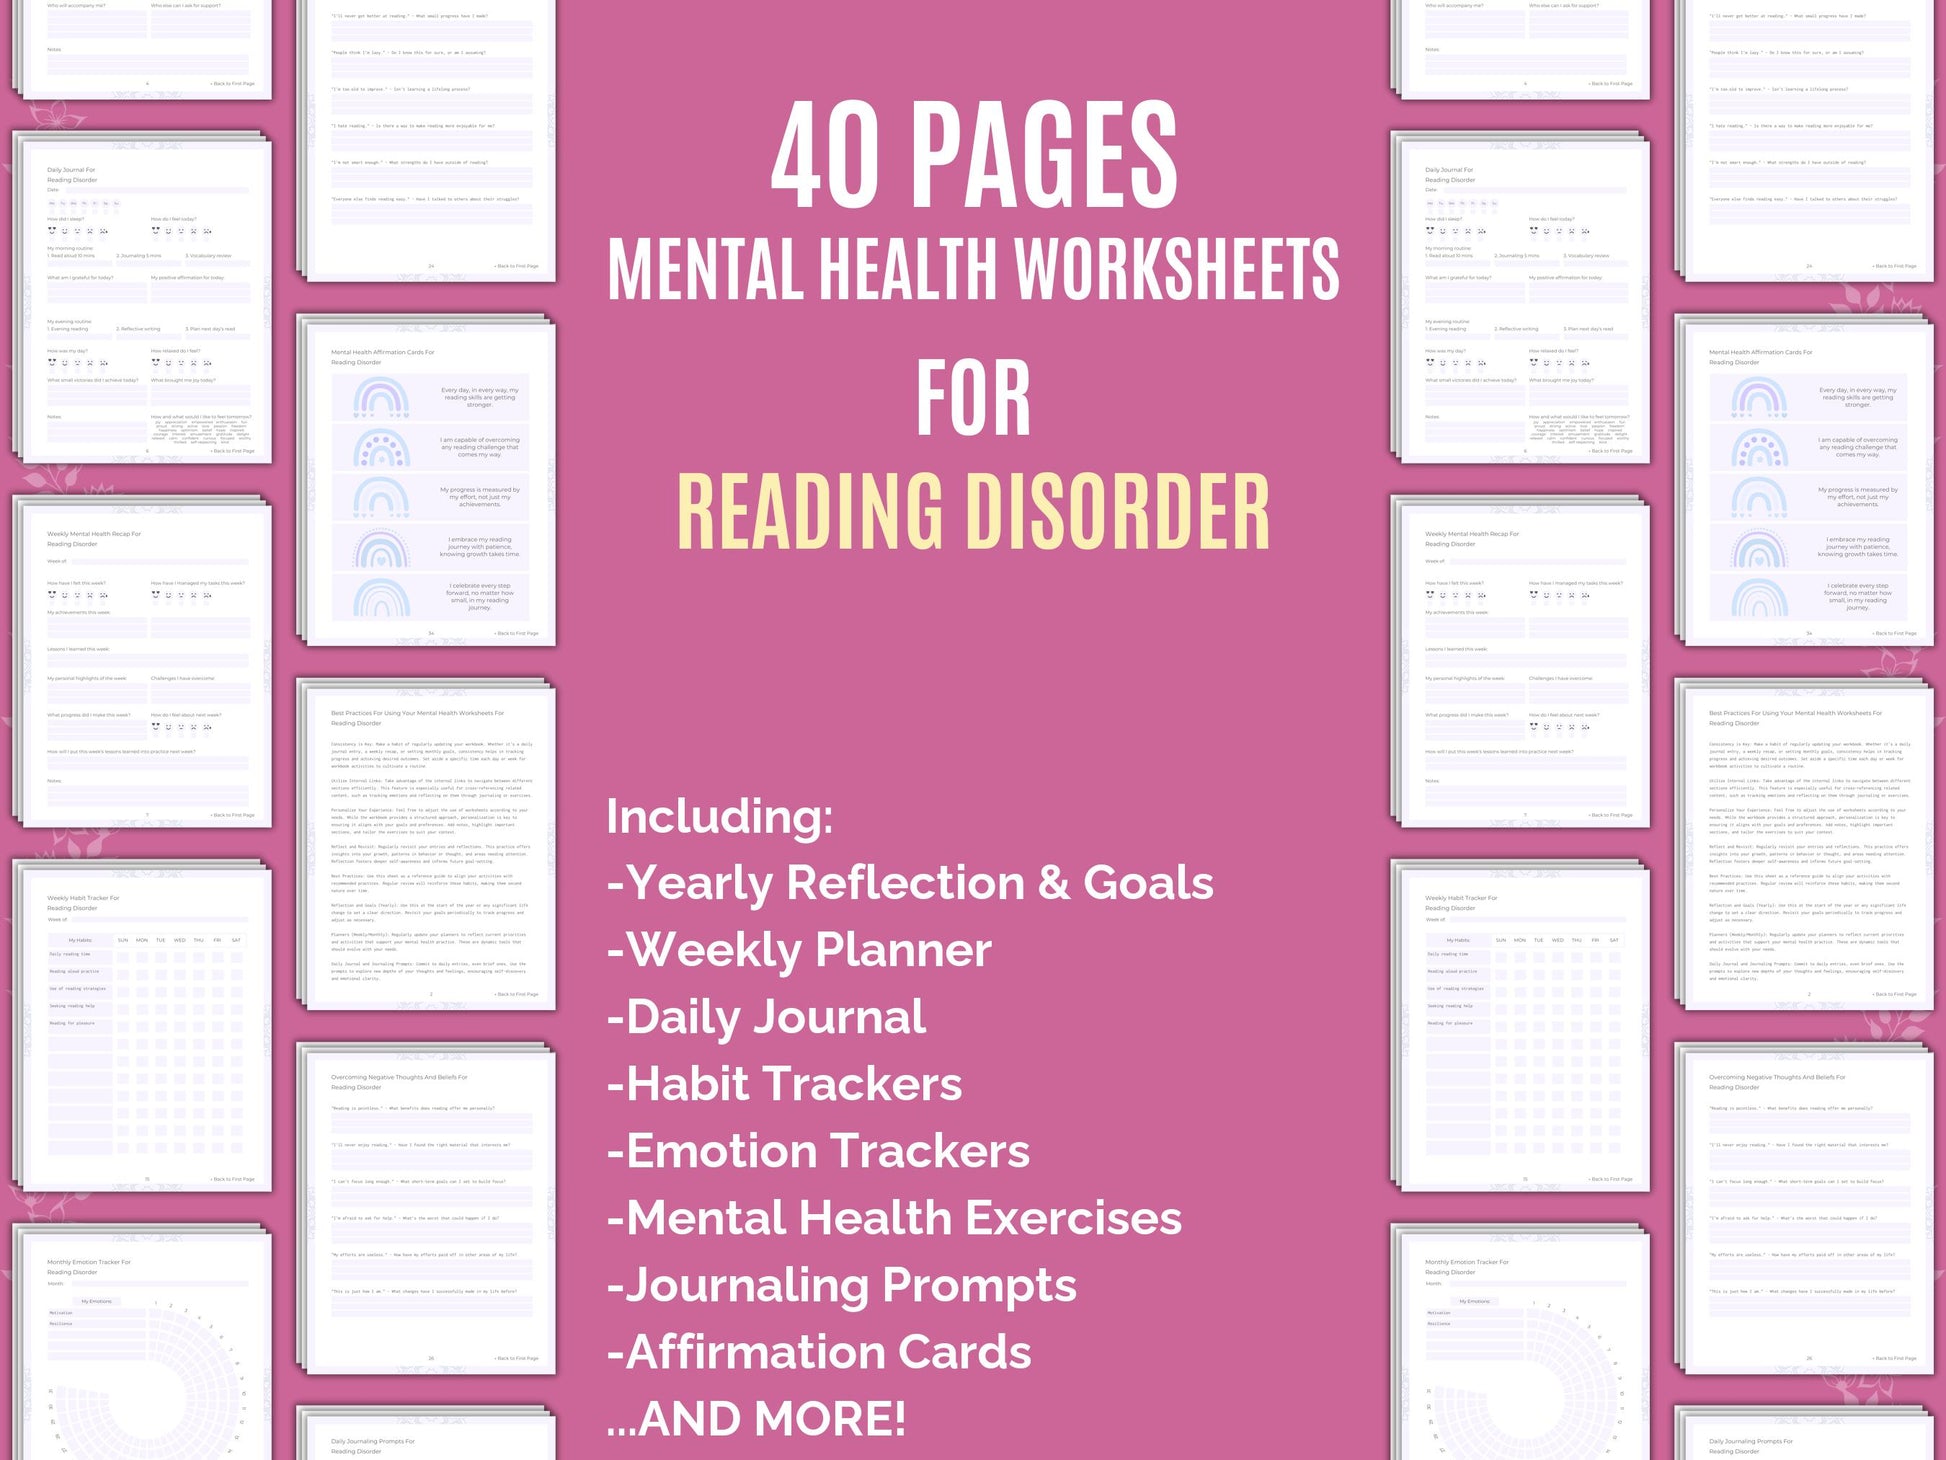 Reading Templates, Reading Tools, Dyslexia, Reading Cheat Sheet, Reading Workbooks, Reading Resources, Reading Mental Health, Reading Goal Setting, Reading Notes, Reading Planners, Reading Journals, Disorder, Reading Therapy, Reading Journaling, Reading Counseling